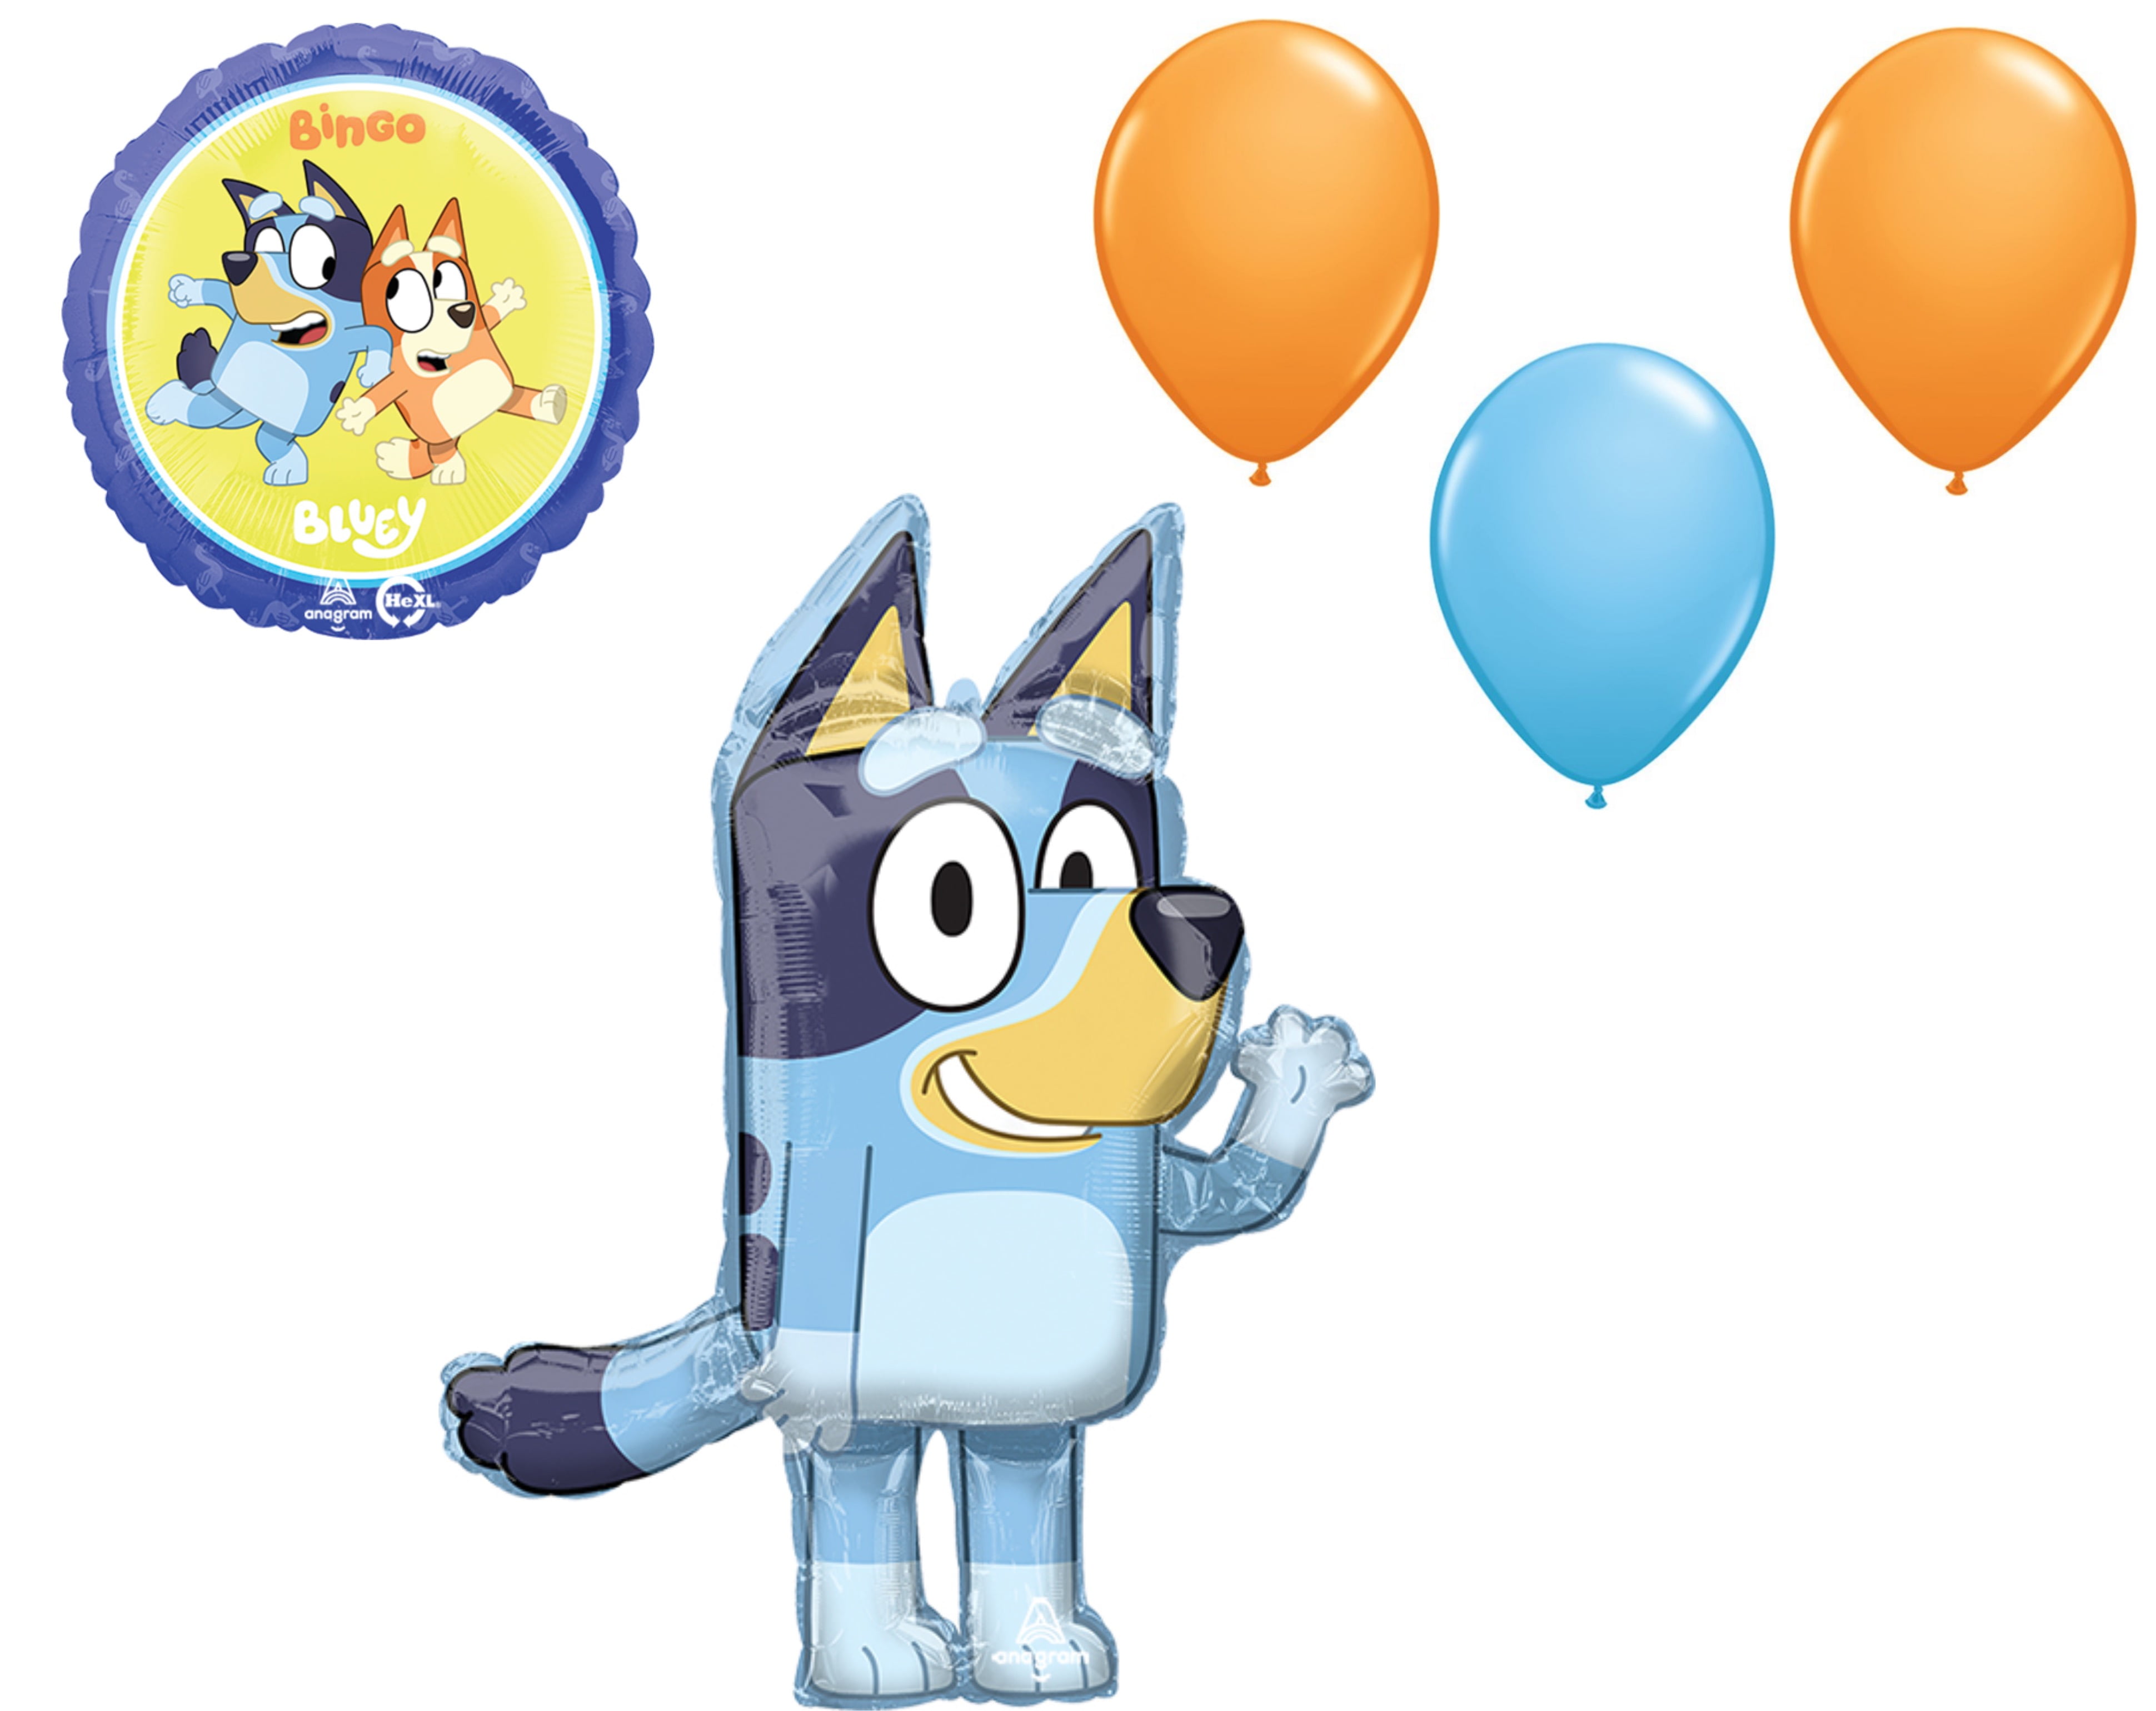  Anagram Bluey Bingo Balloons - Bluey Birthday Party Supplies  Balloon Bouquet Decorations Pack of 4 : Toys & Games